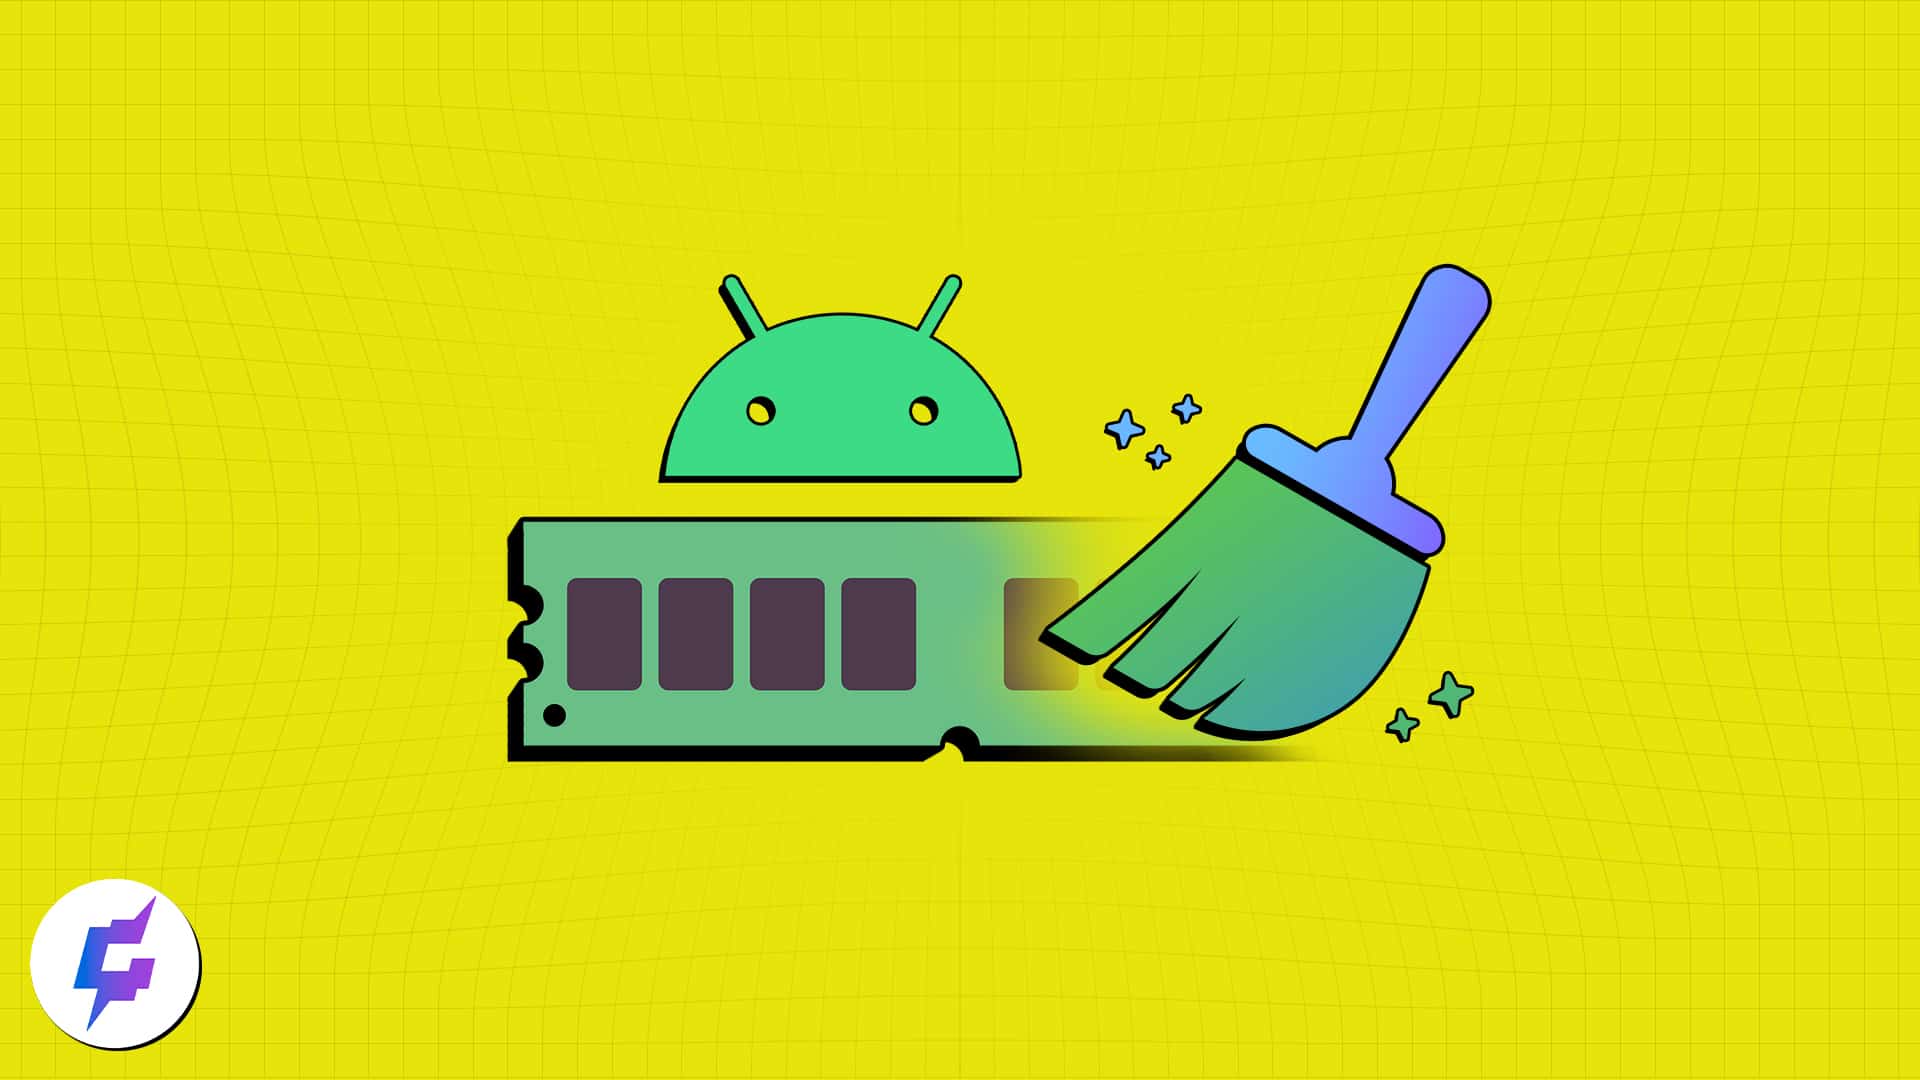 How to clear RAM on Android phone